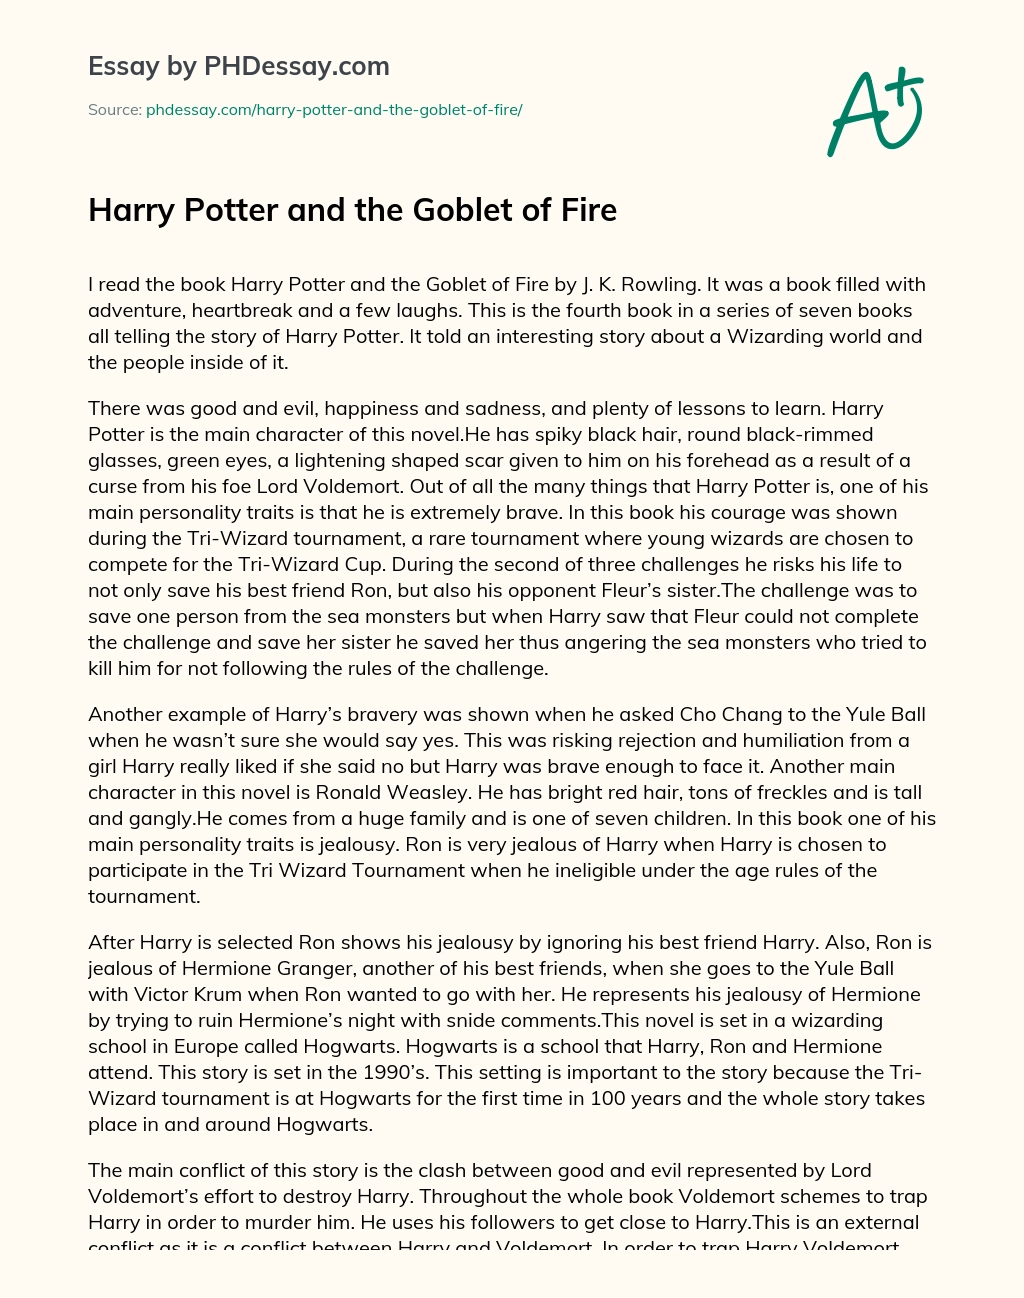 Harry Potter and the Goblet of Fire essay